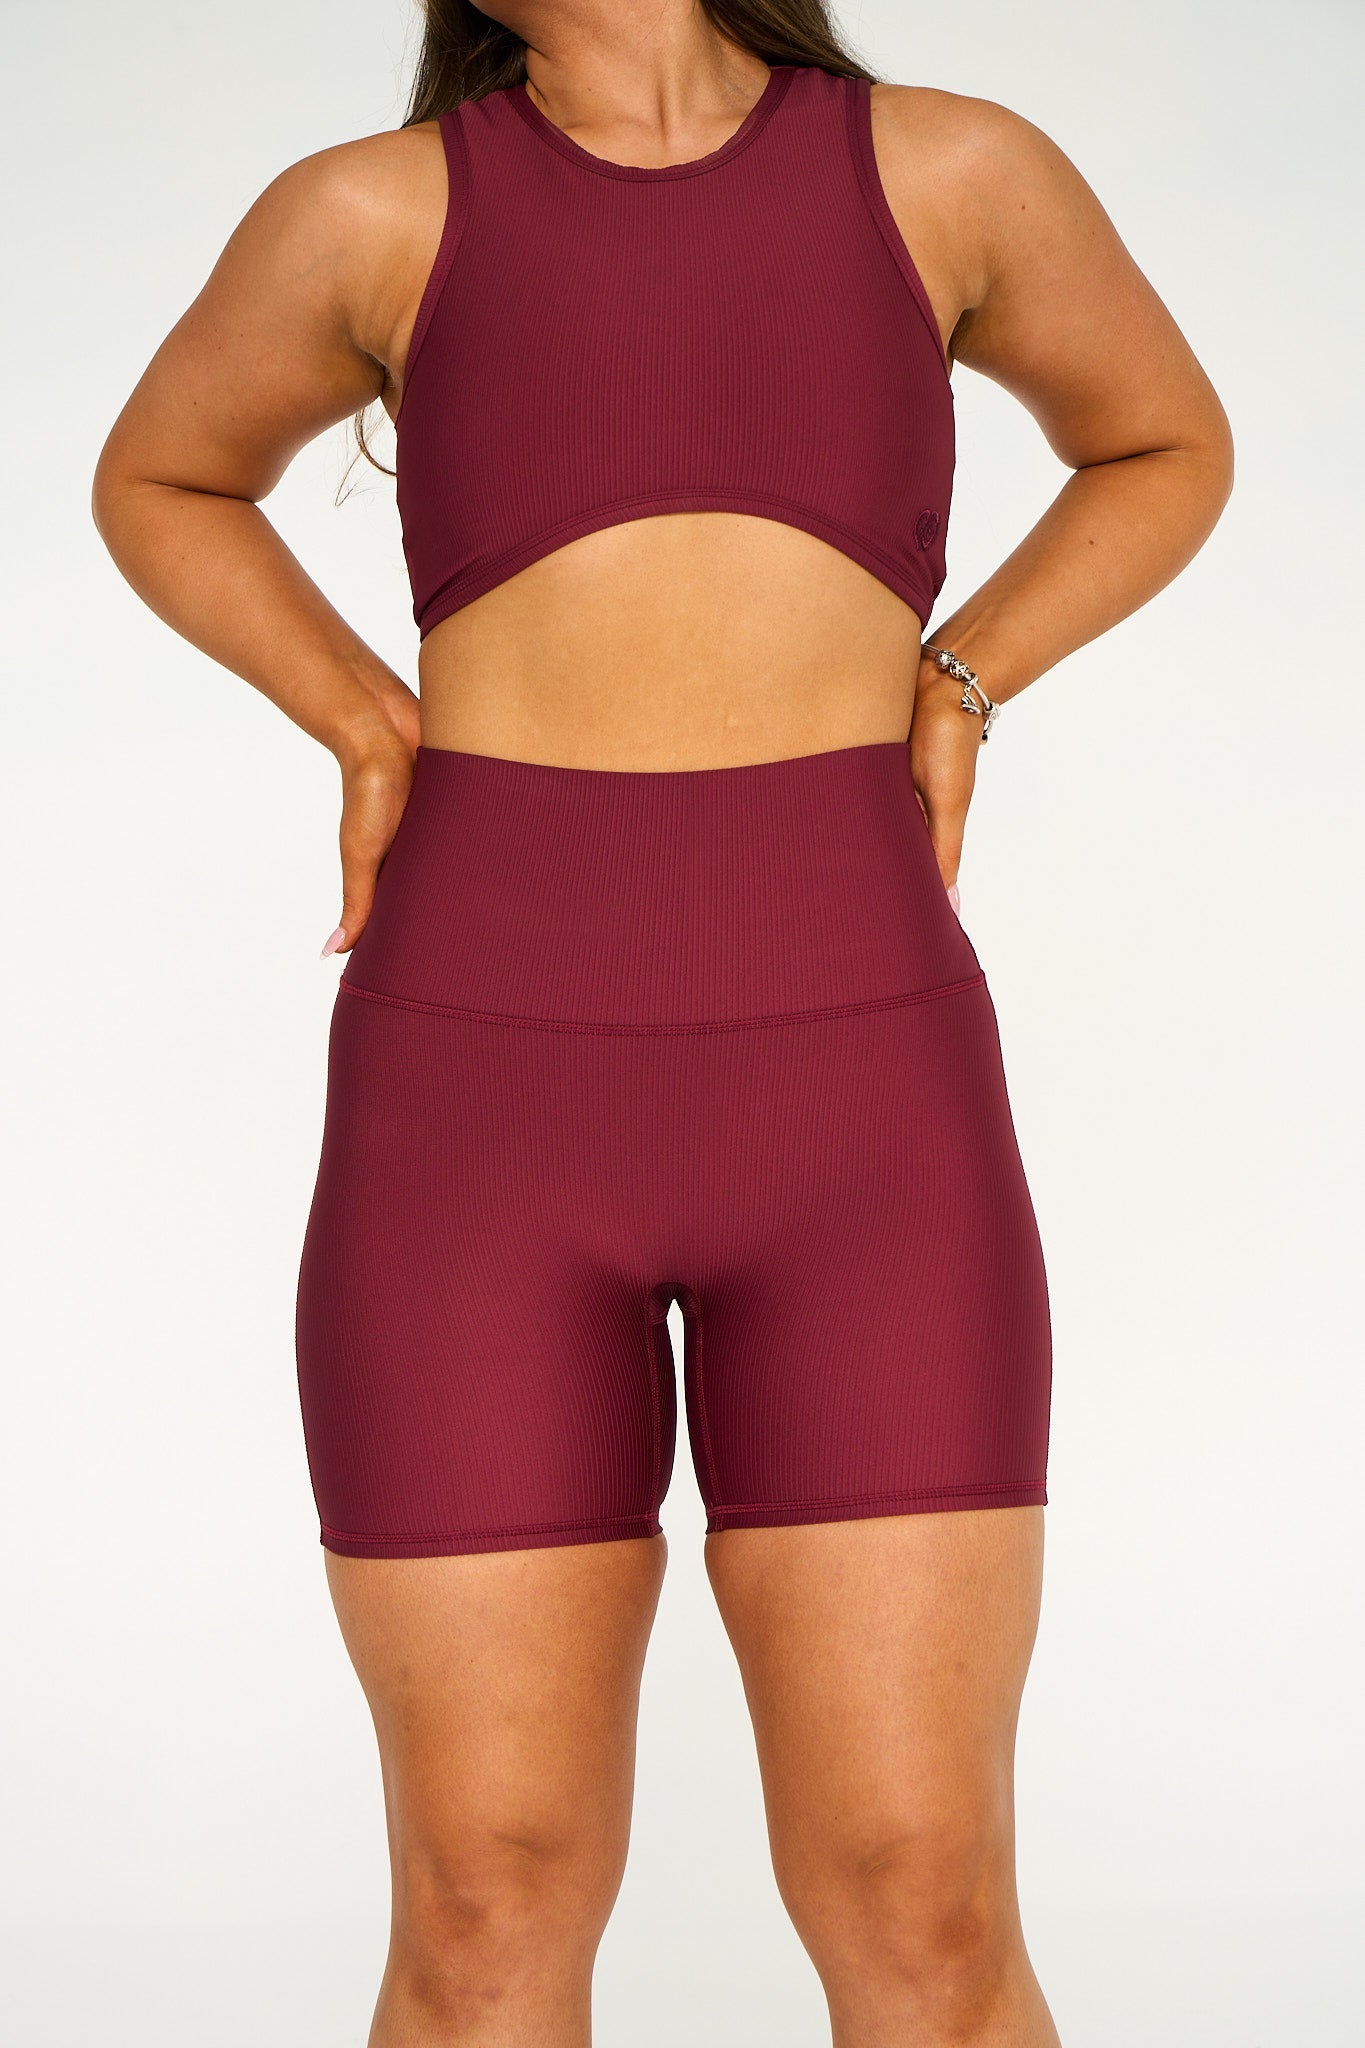 Young woman wearing deep red active wear high waisted bike shorts. 